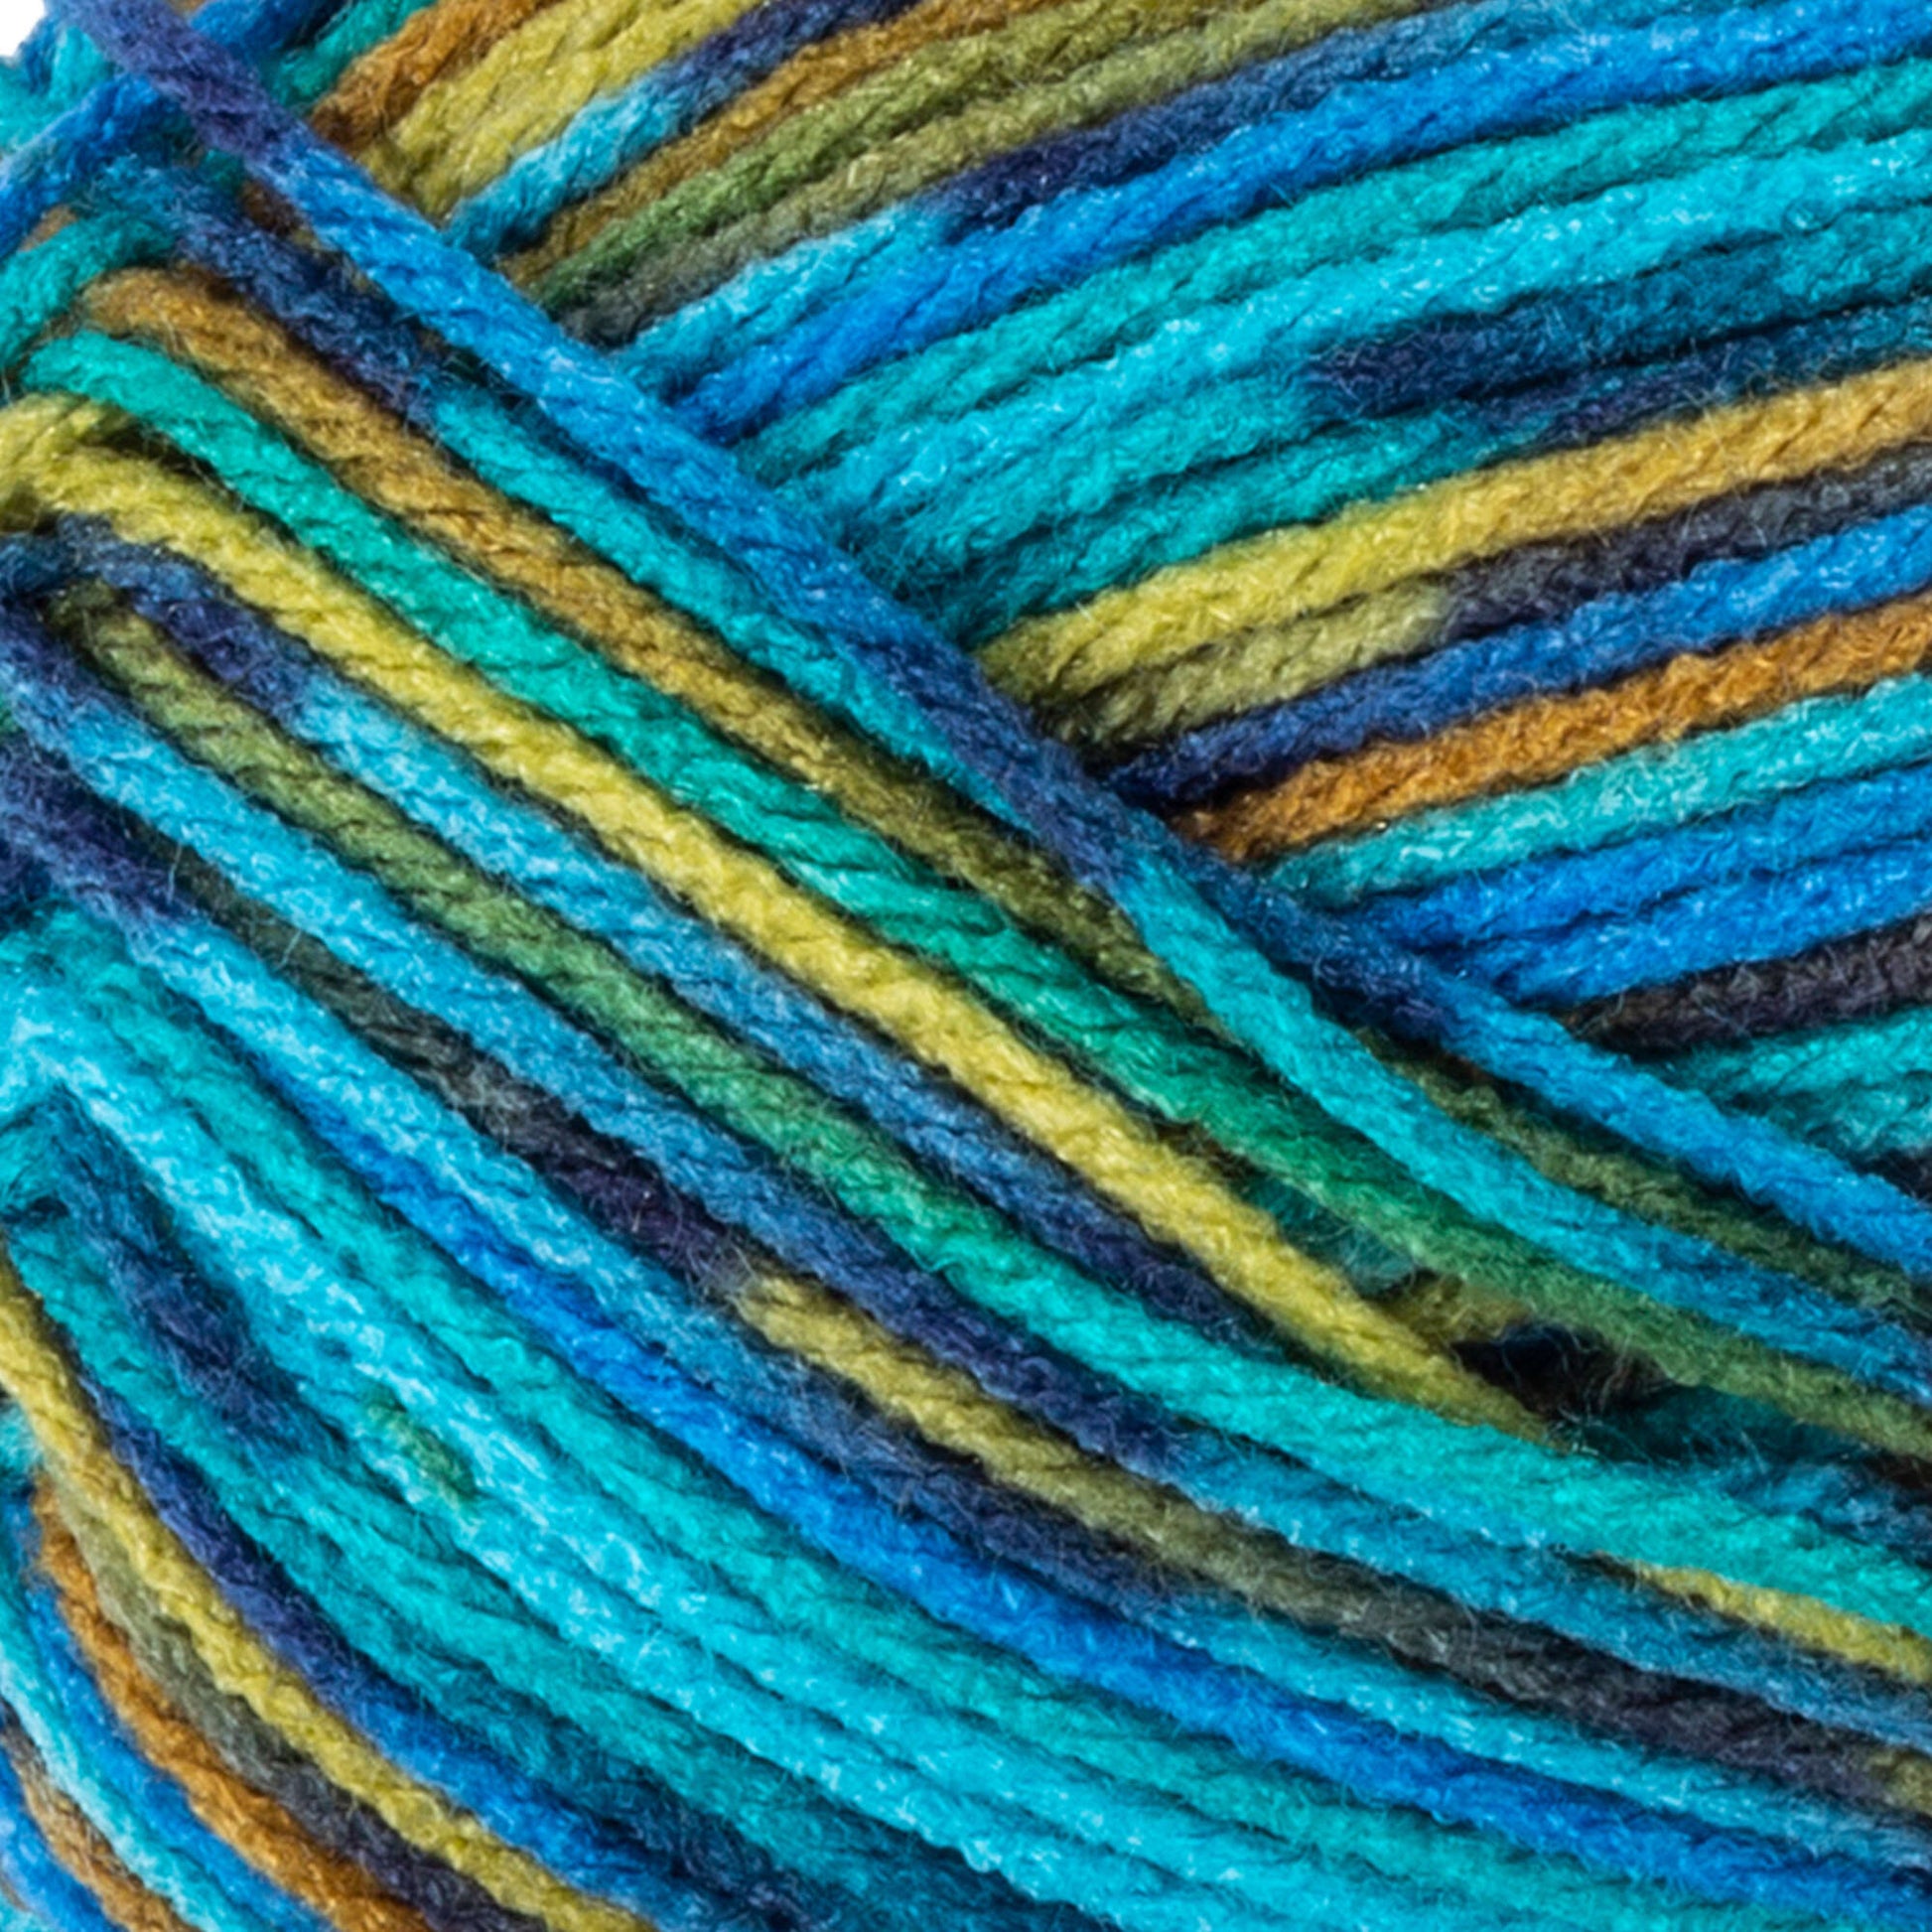 Red Heart Hello Gorgeous Yarn - Discontinued shades